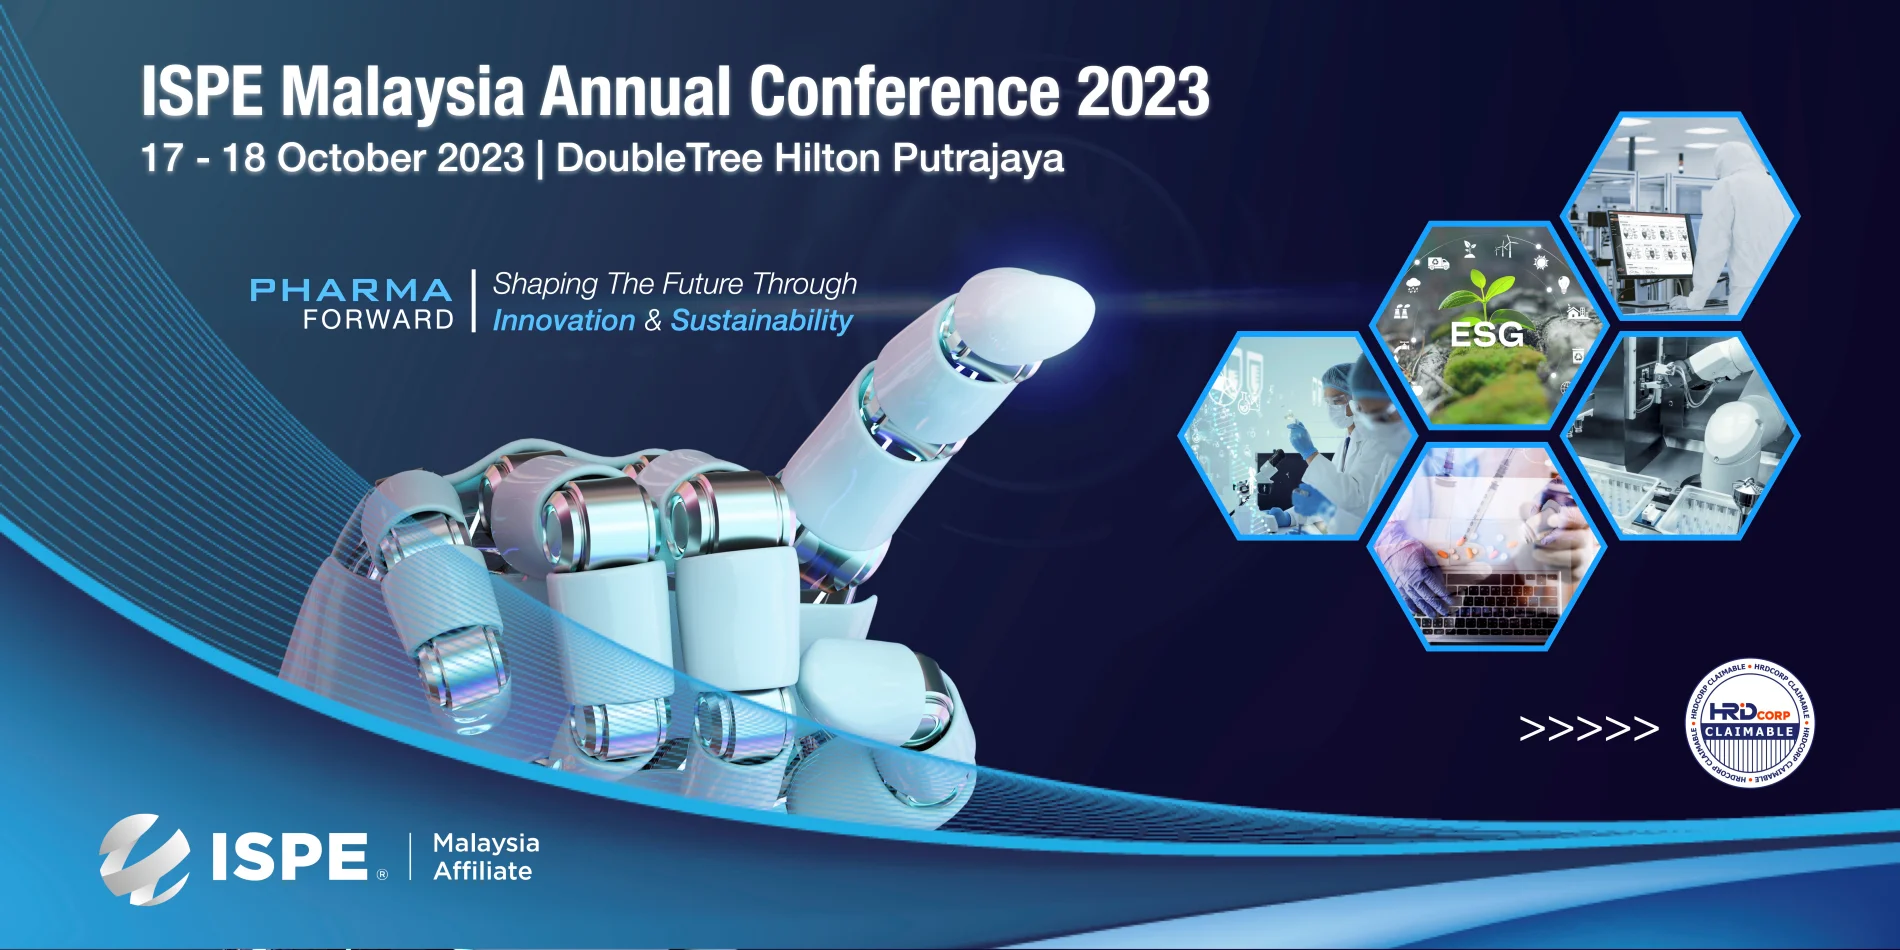 ISPE Malaysia Annual Conference 2023